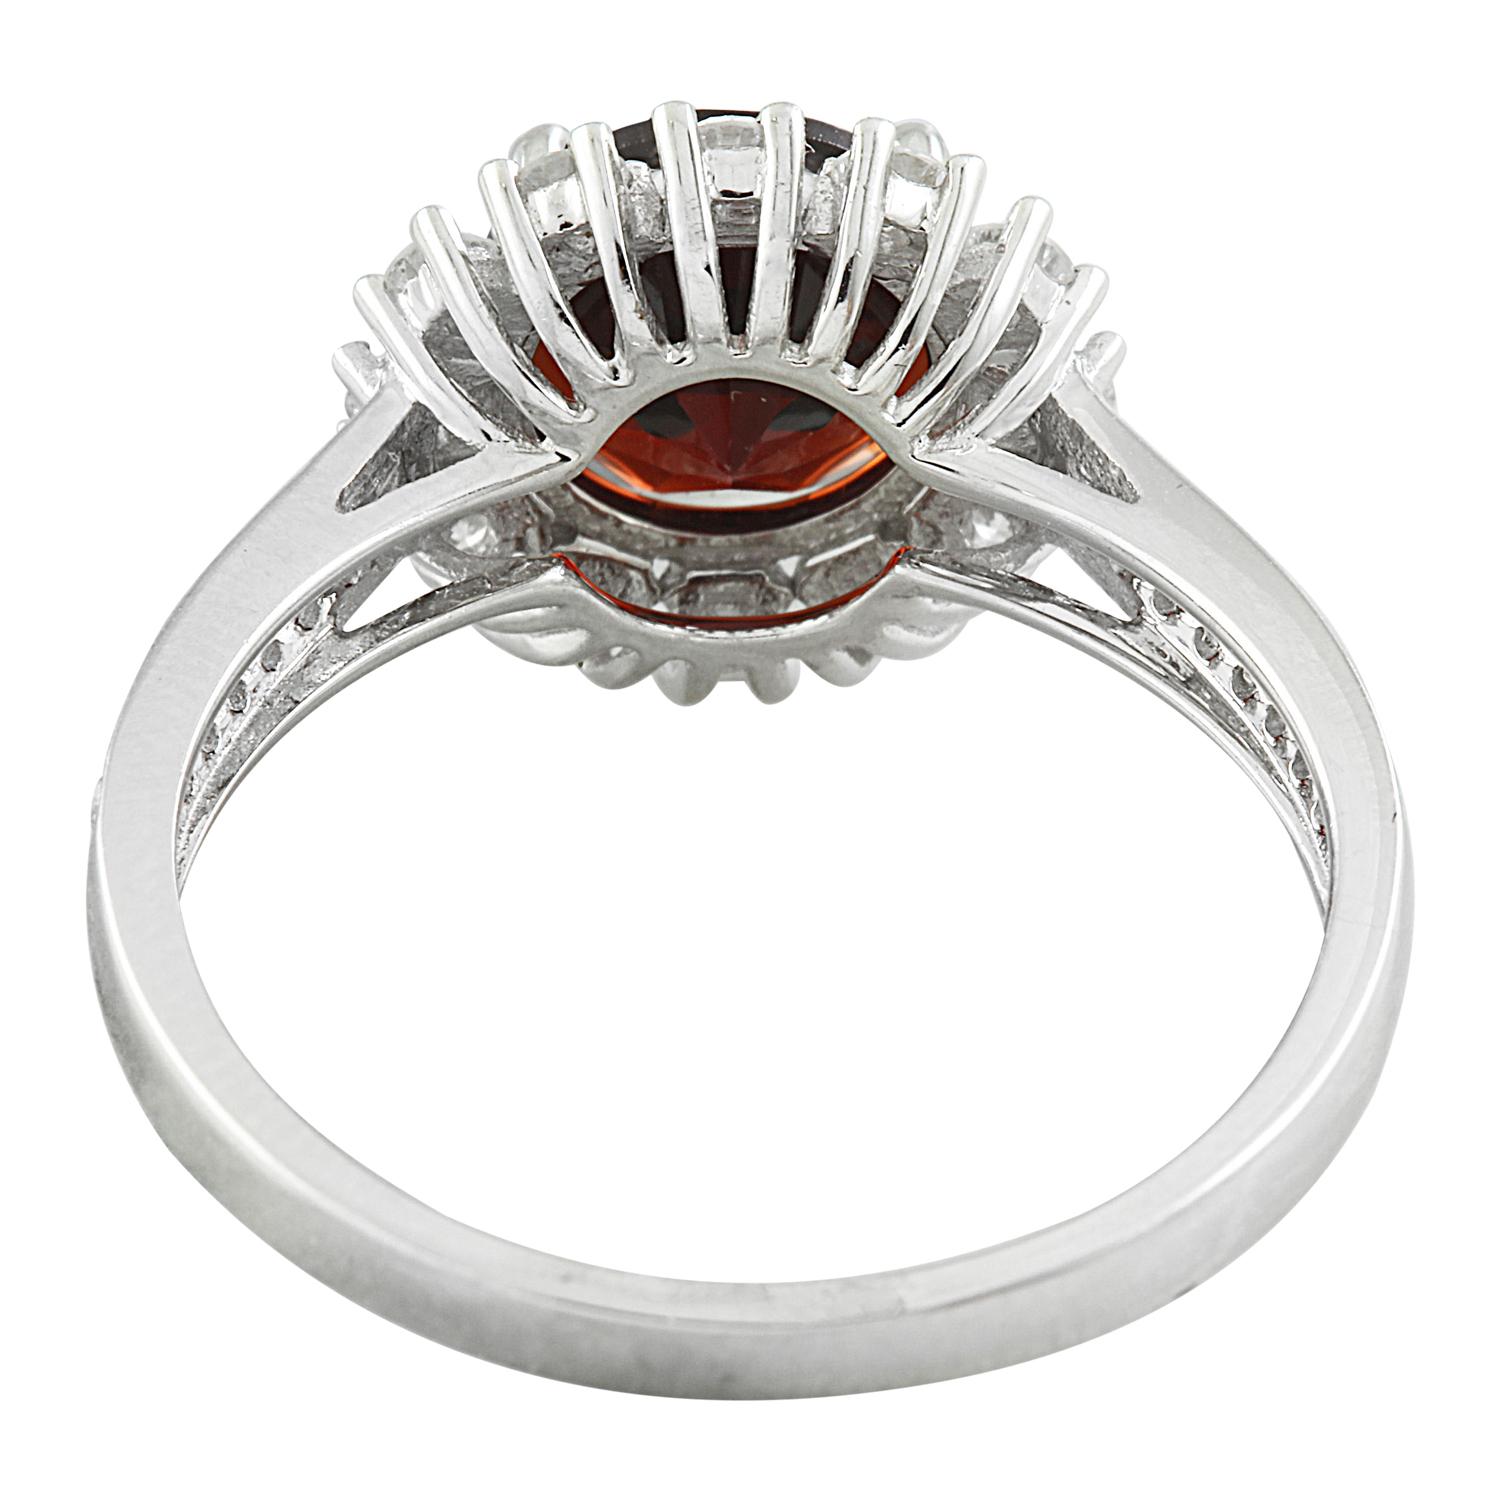 Round Cut Exquisite Natural Garnet Diamond Ring in 14K Solid White Gold For Sale